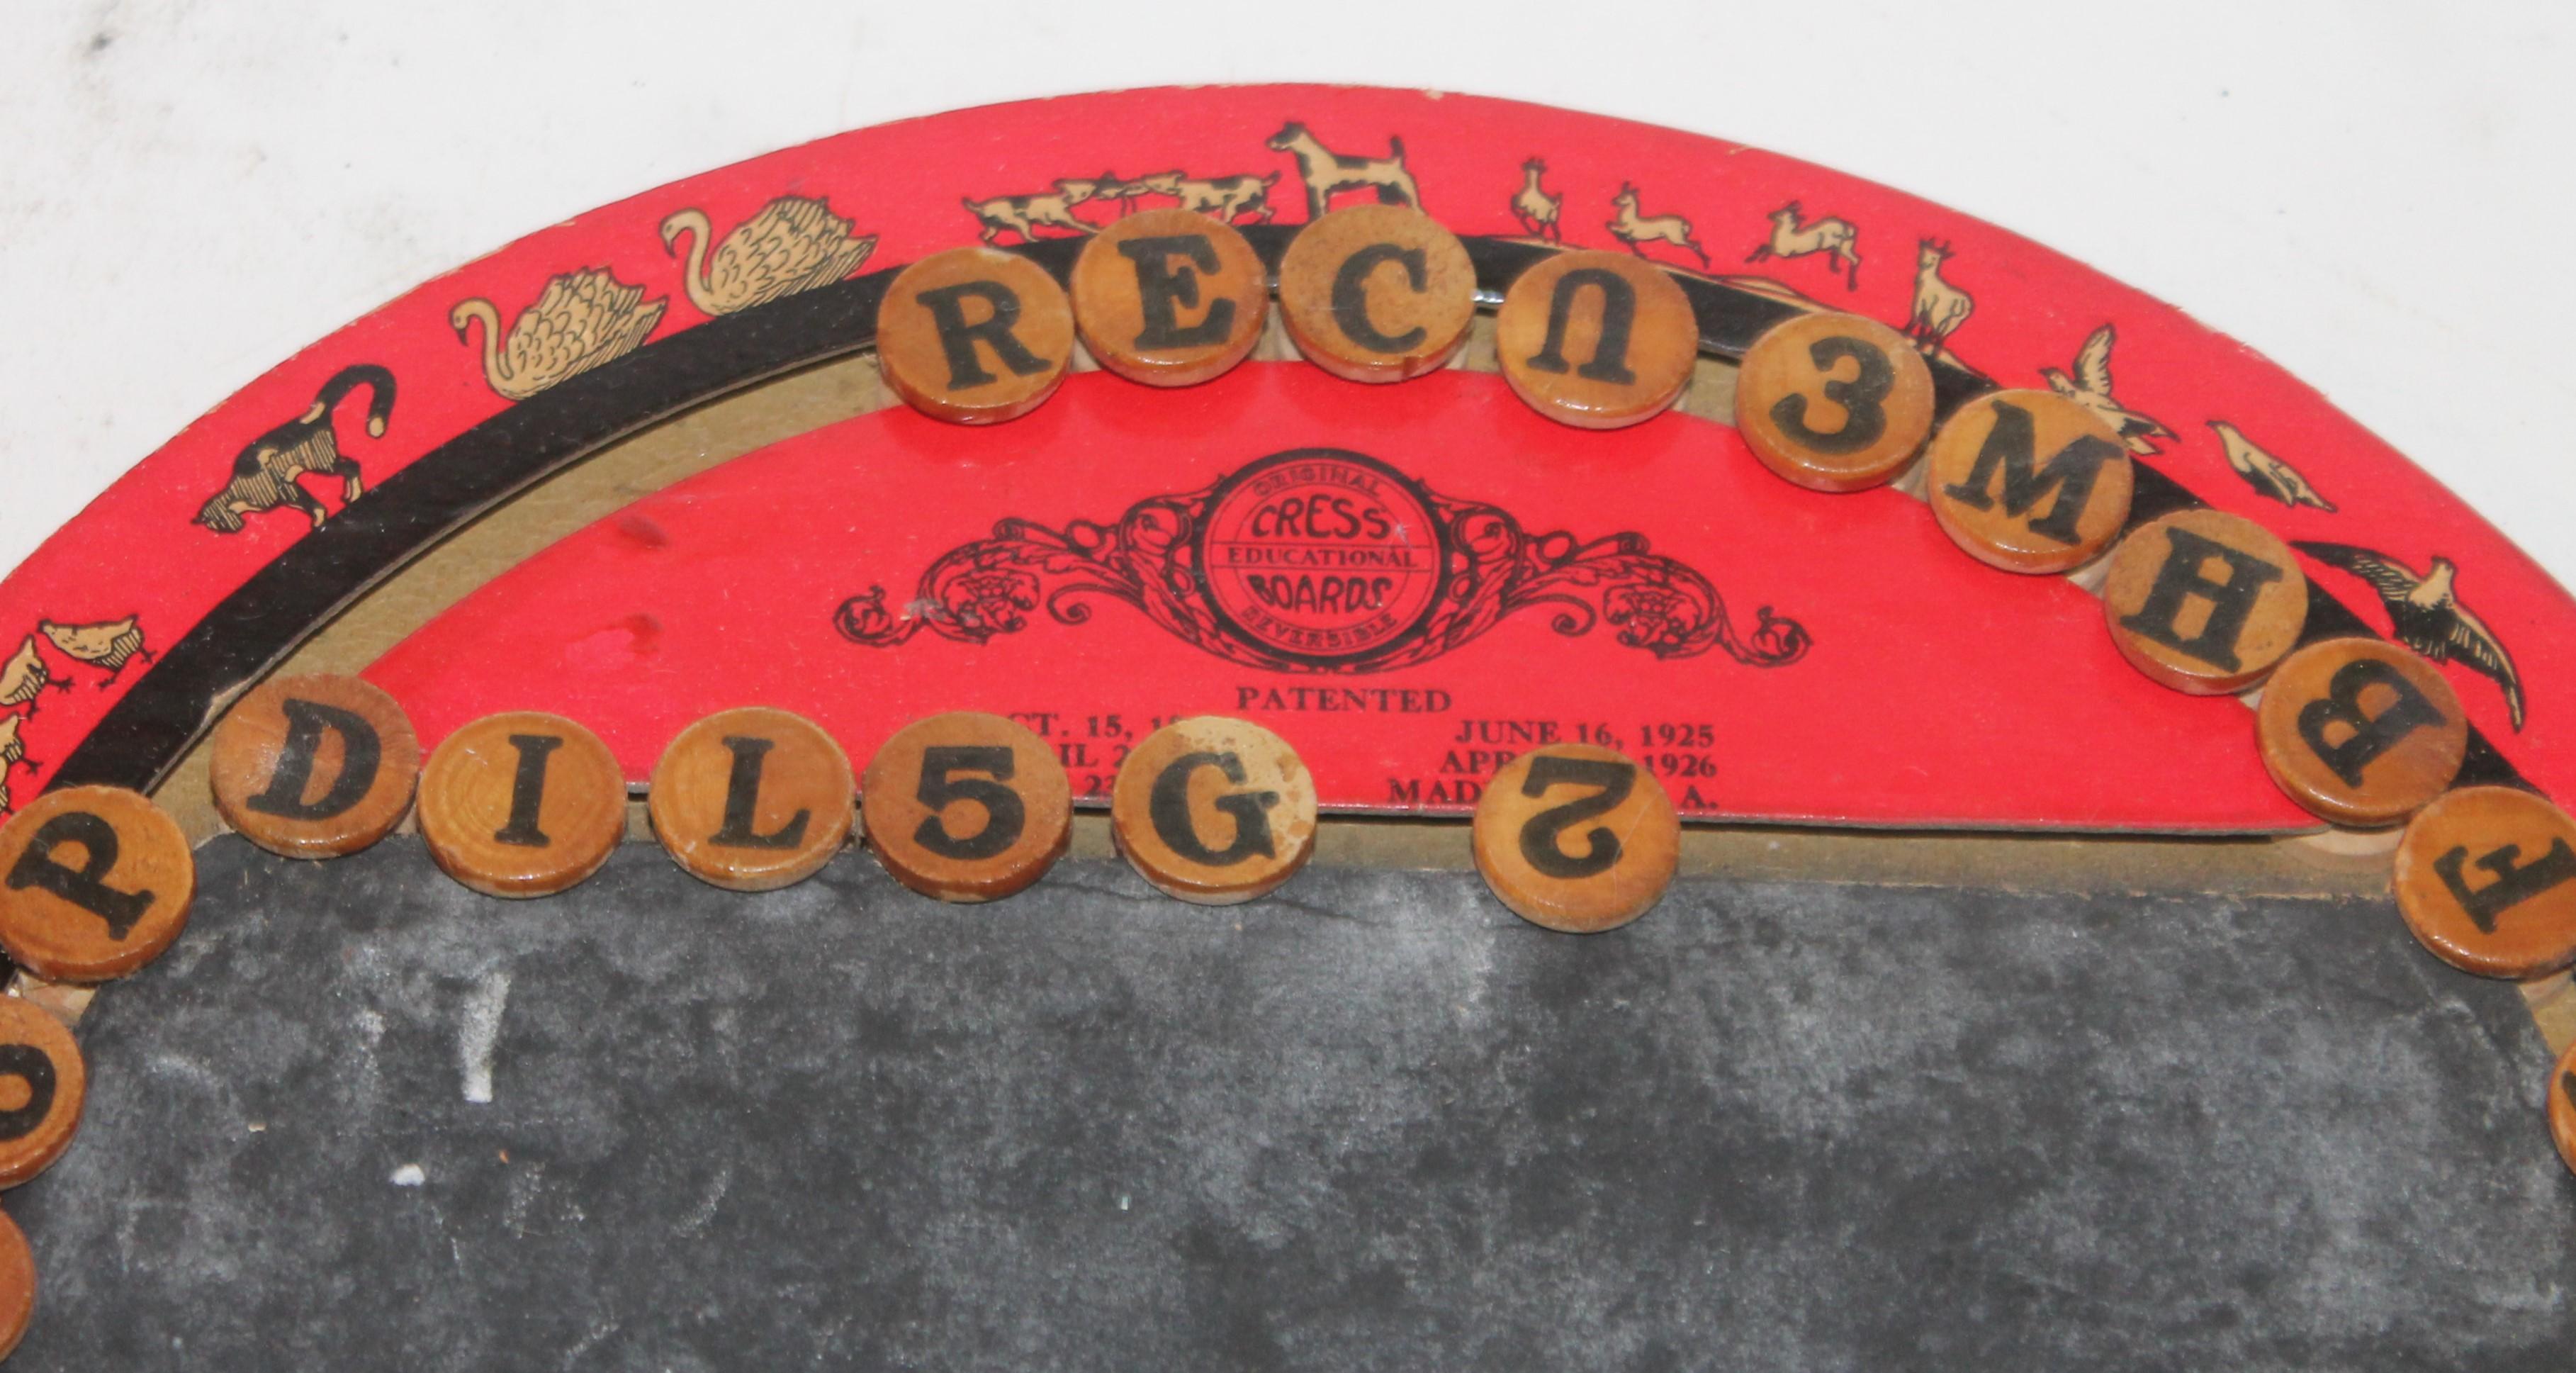 This cool cress alphabet game board is round and red ground. It is also dated 1926 with a chalk board on the front of the game board. Children pictures on the reverse of the board as well. Condition is very good.